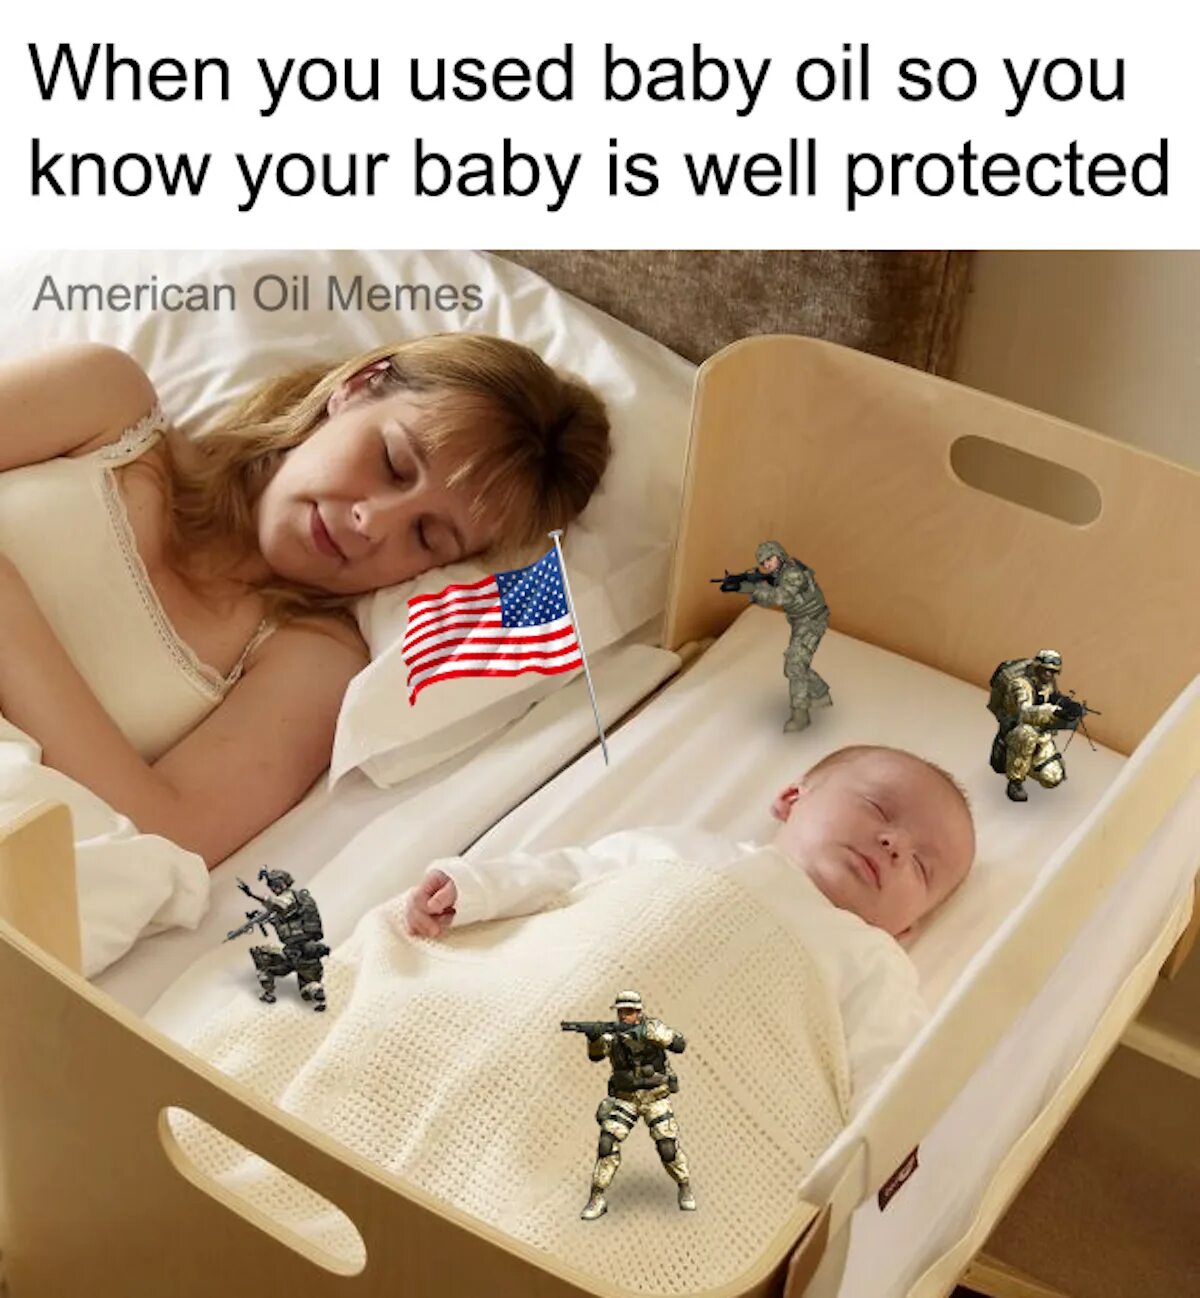 Oil Мем. American Oil memes. USA Oil memes. American Oil Мем. This baby yours